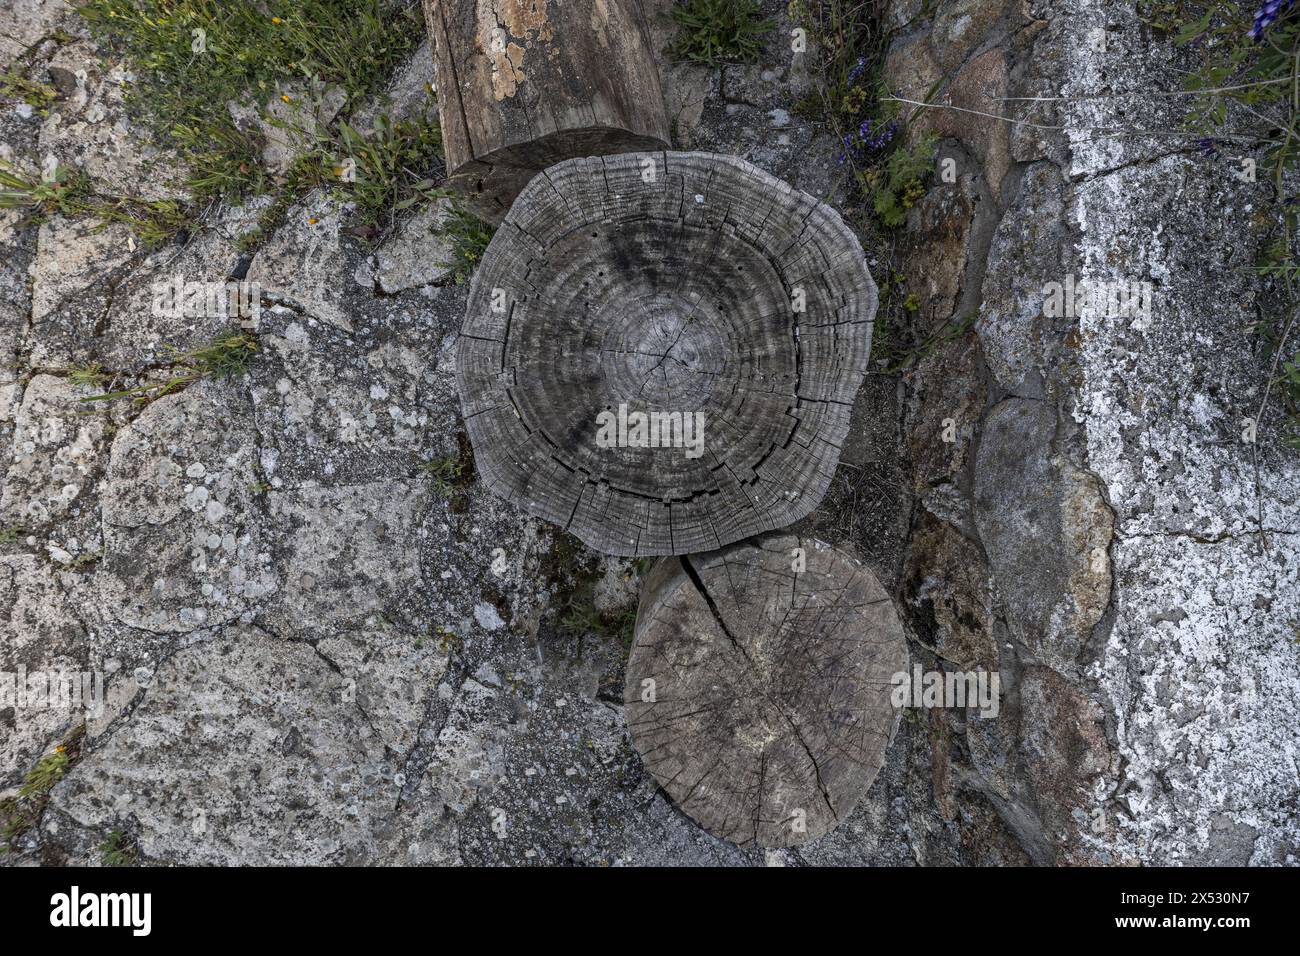 Some old wooden stumps in a garden with granite rock soils Stock Photo